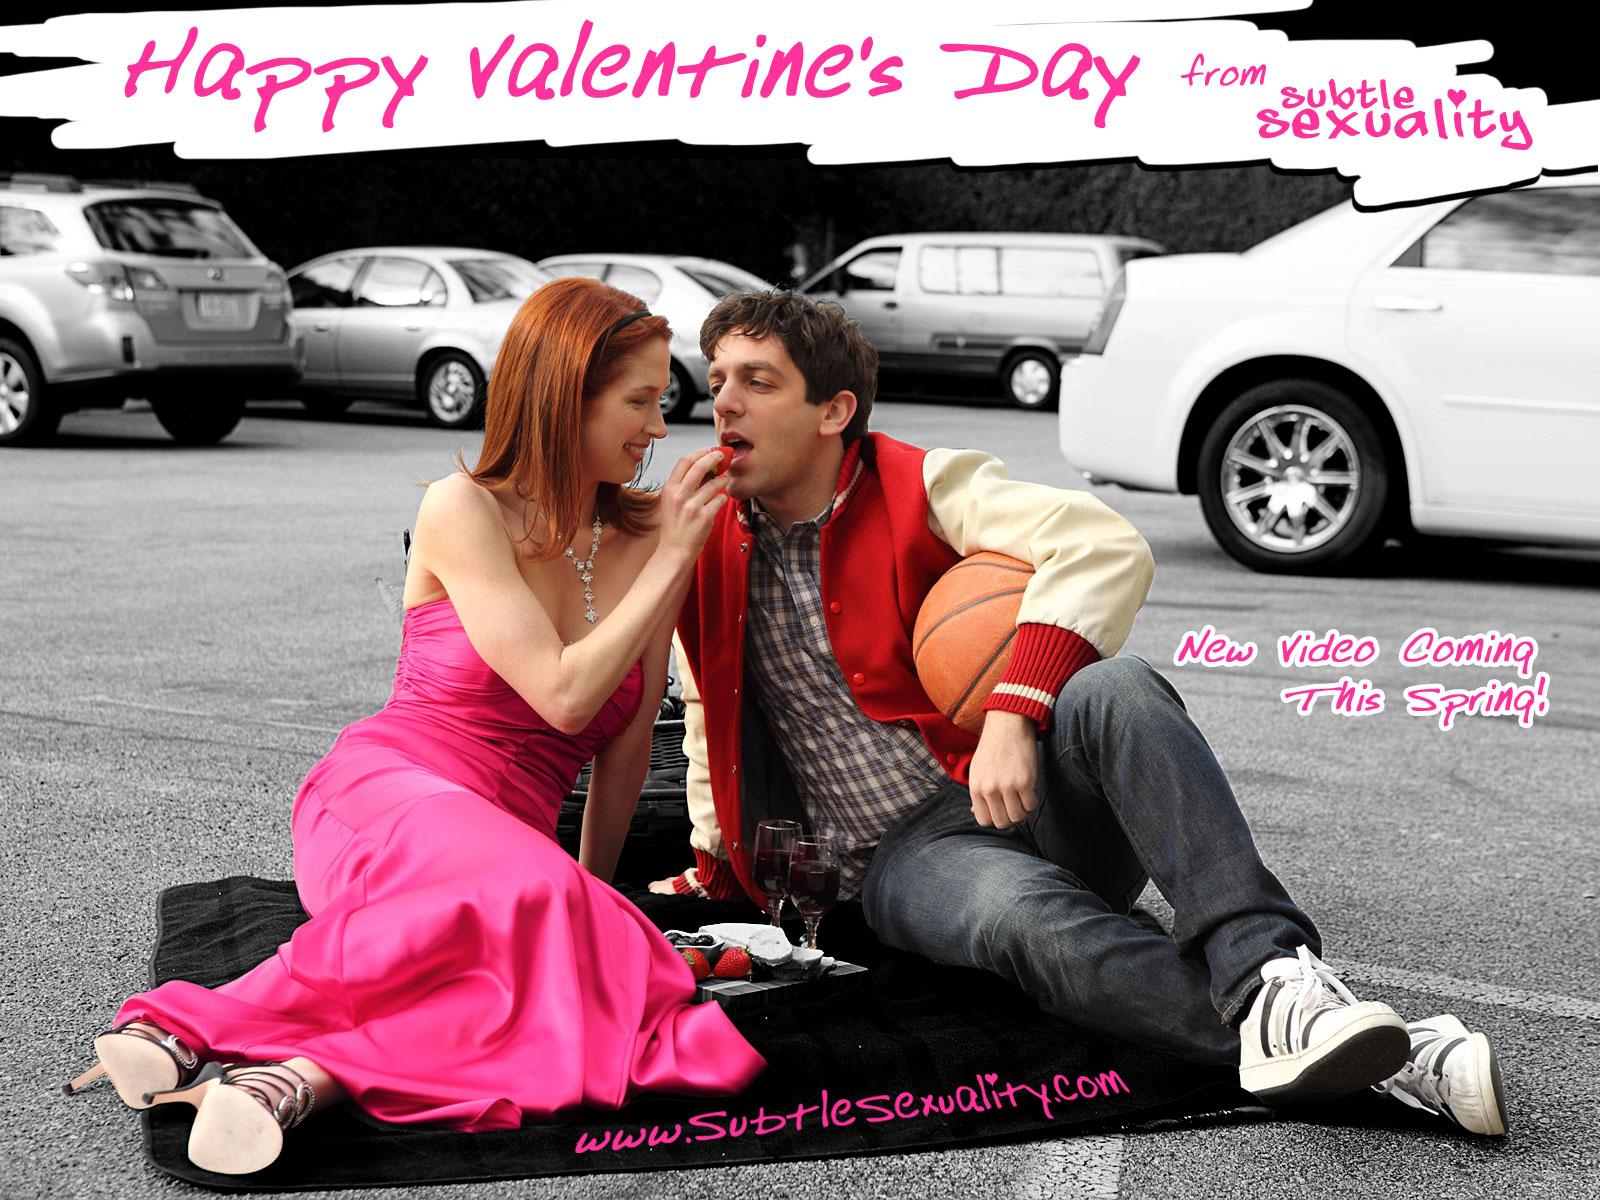 The Office Valentine's Day wallpapers • OfficeTally